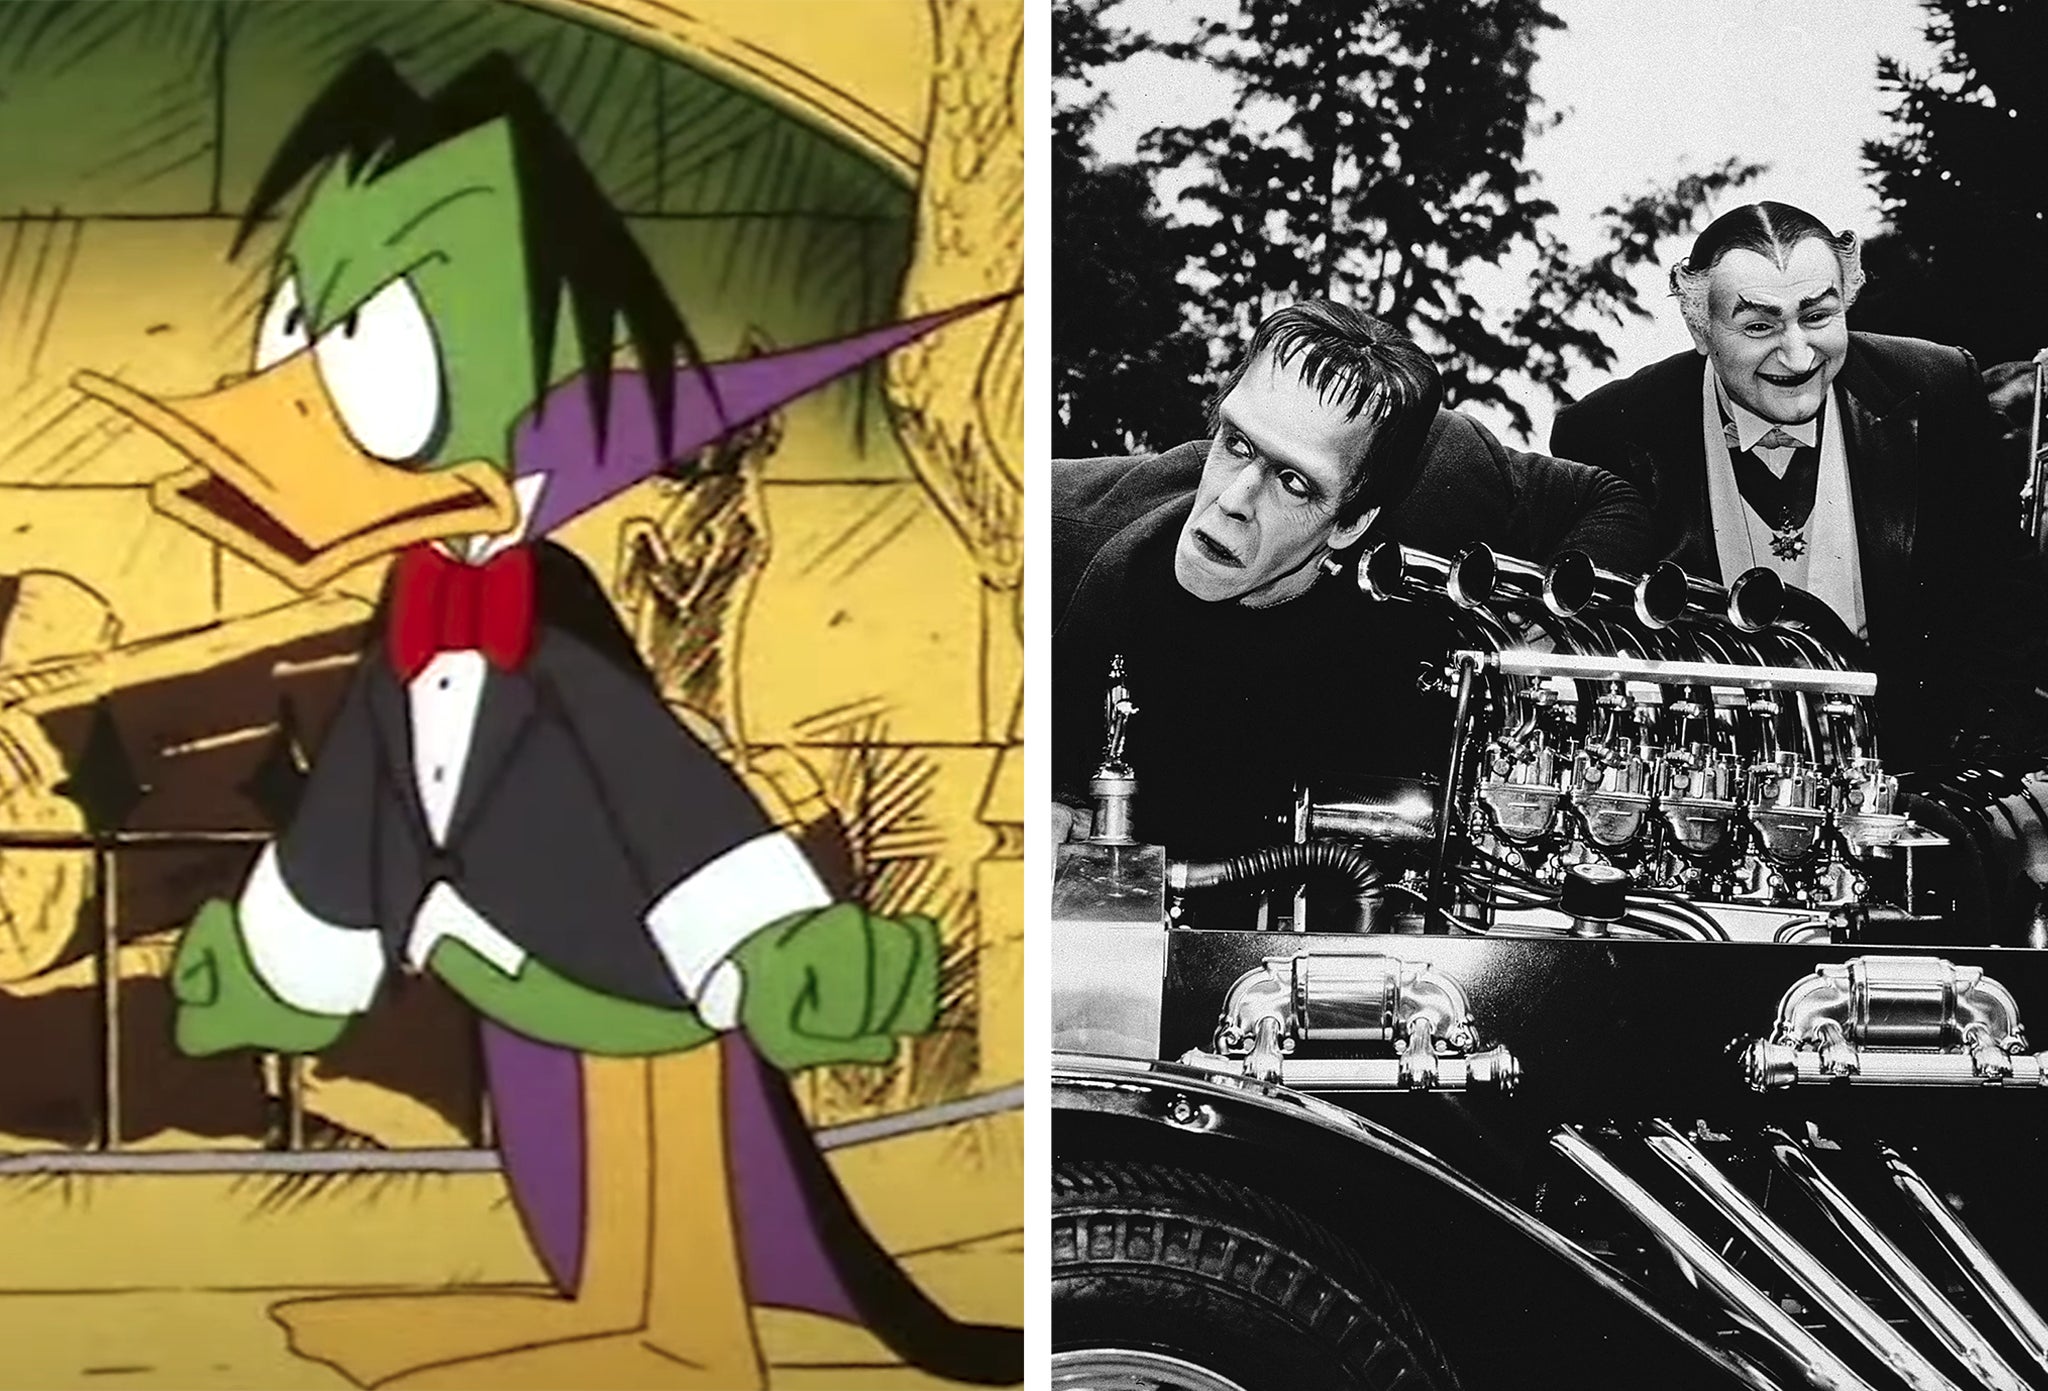 Count Dracula was repackaged for children in ‘Count Duckula’ and ‘the Munsters’